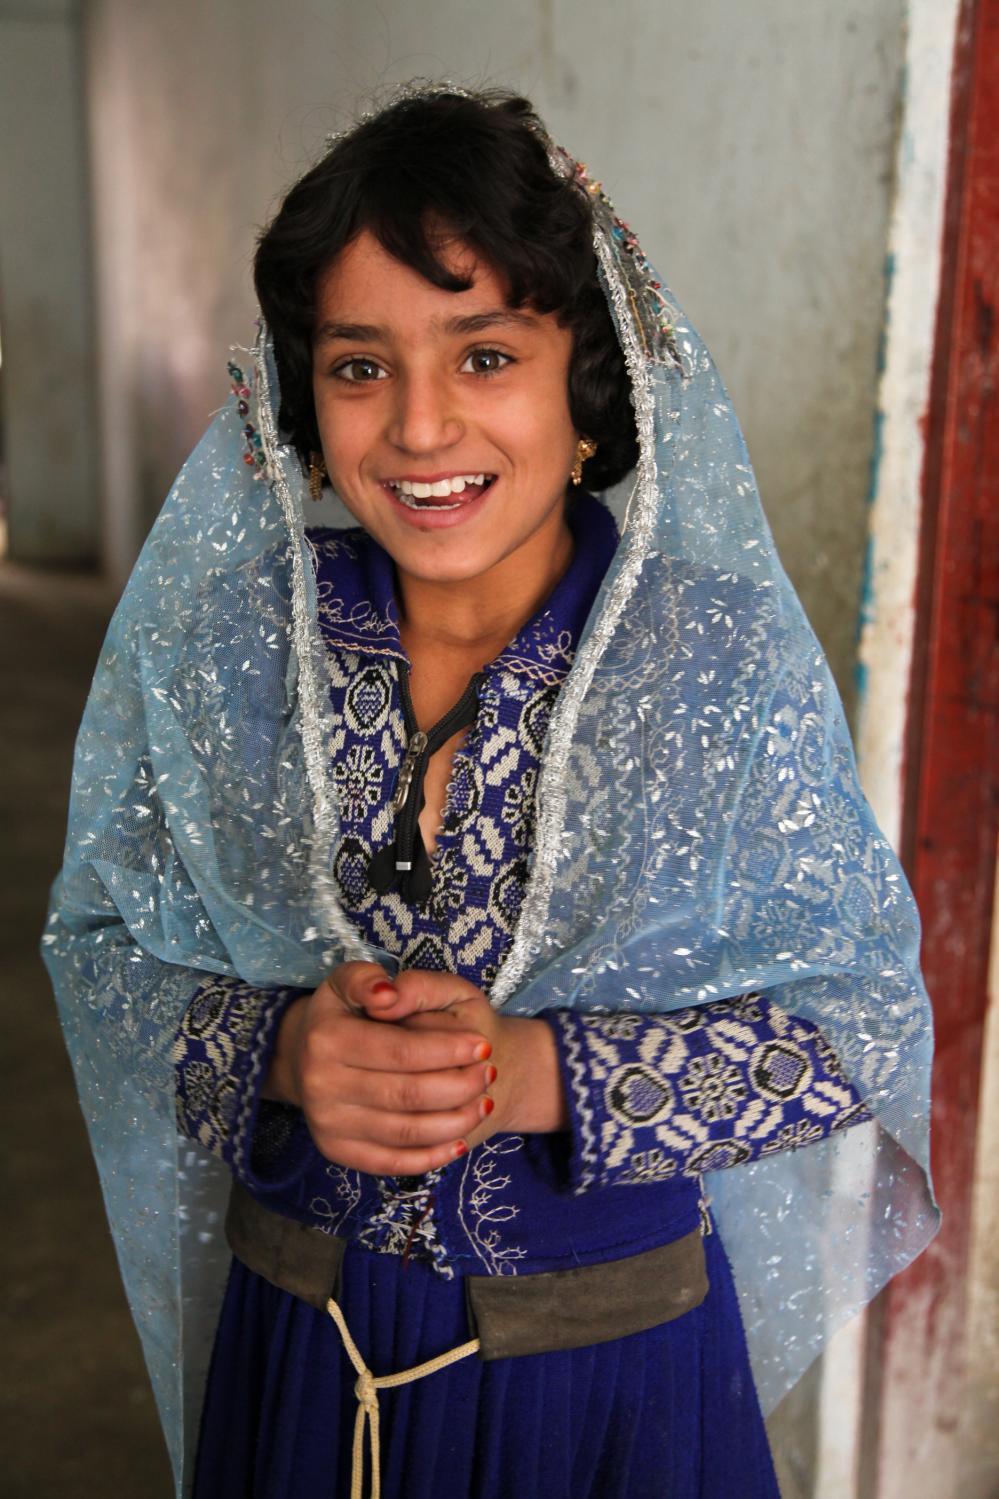 An Afghan girl smiles into the camera at Khost city orphanage, Khost province, Afghanistan, Oct. 22, 2012.